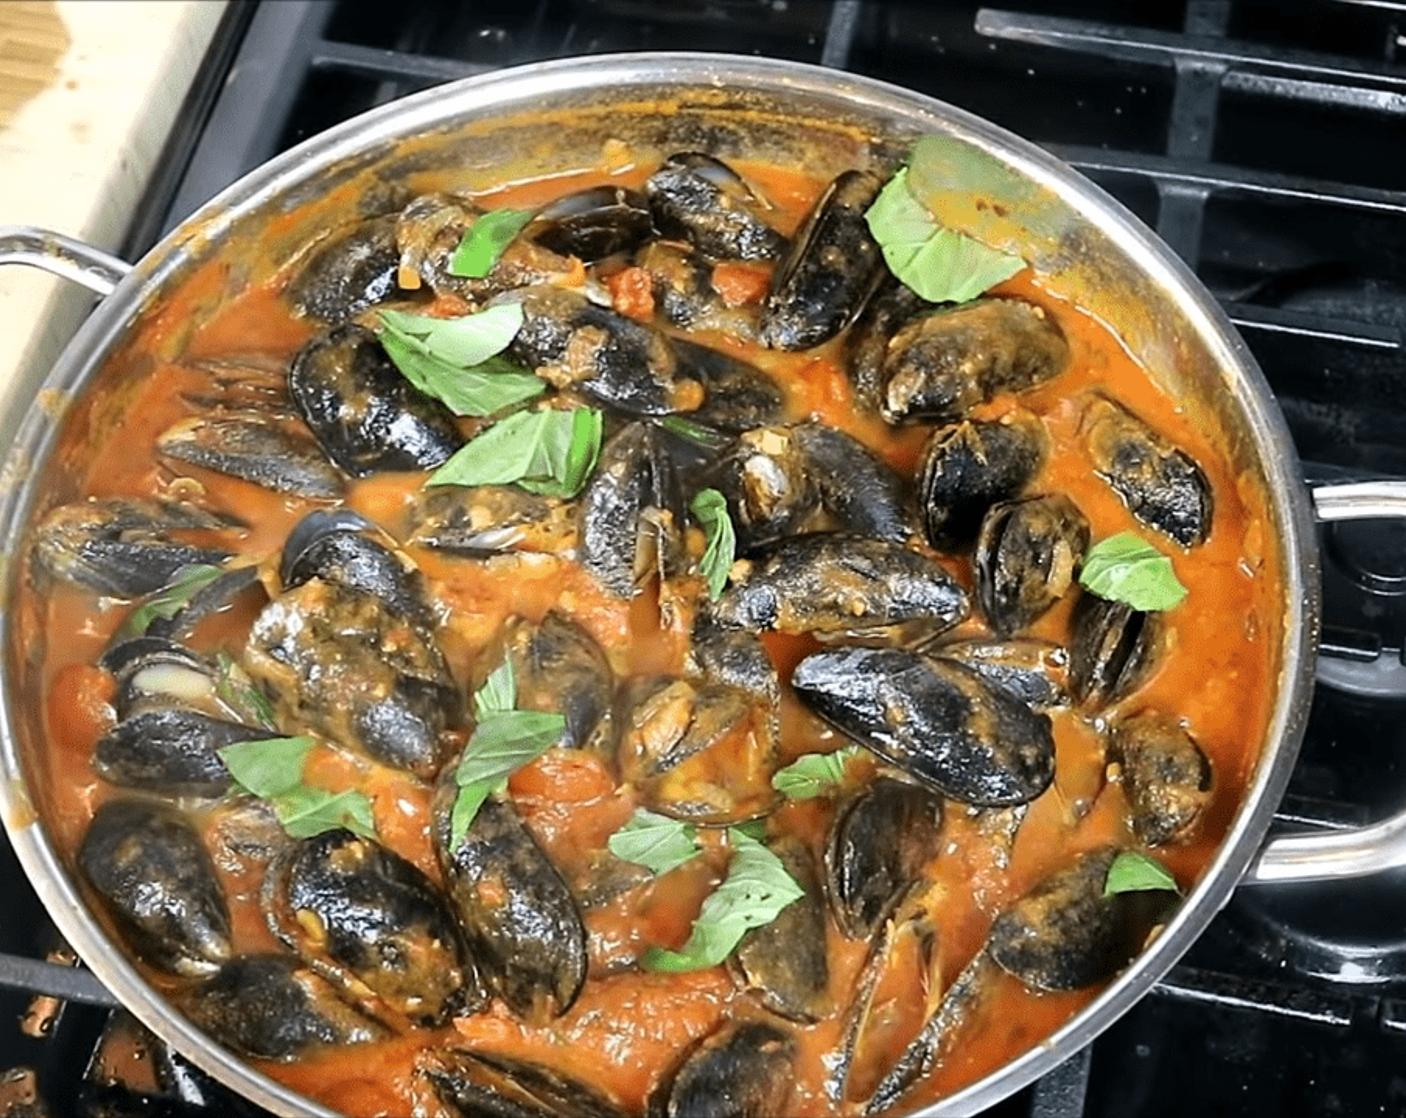  Dive into this scrumptious spiced mussels in white wine recipe!